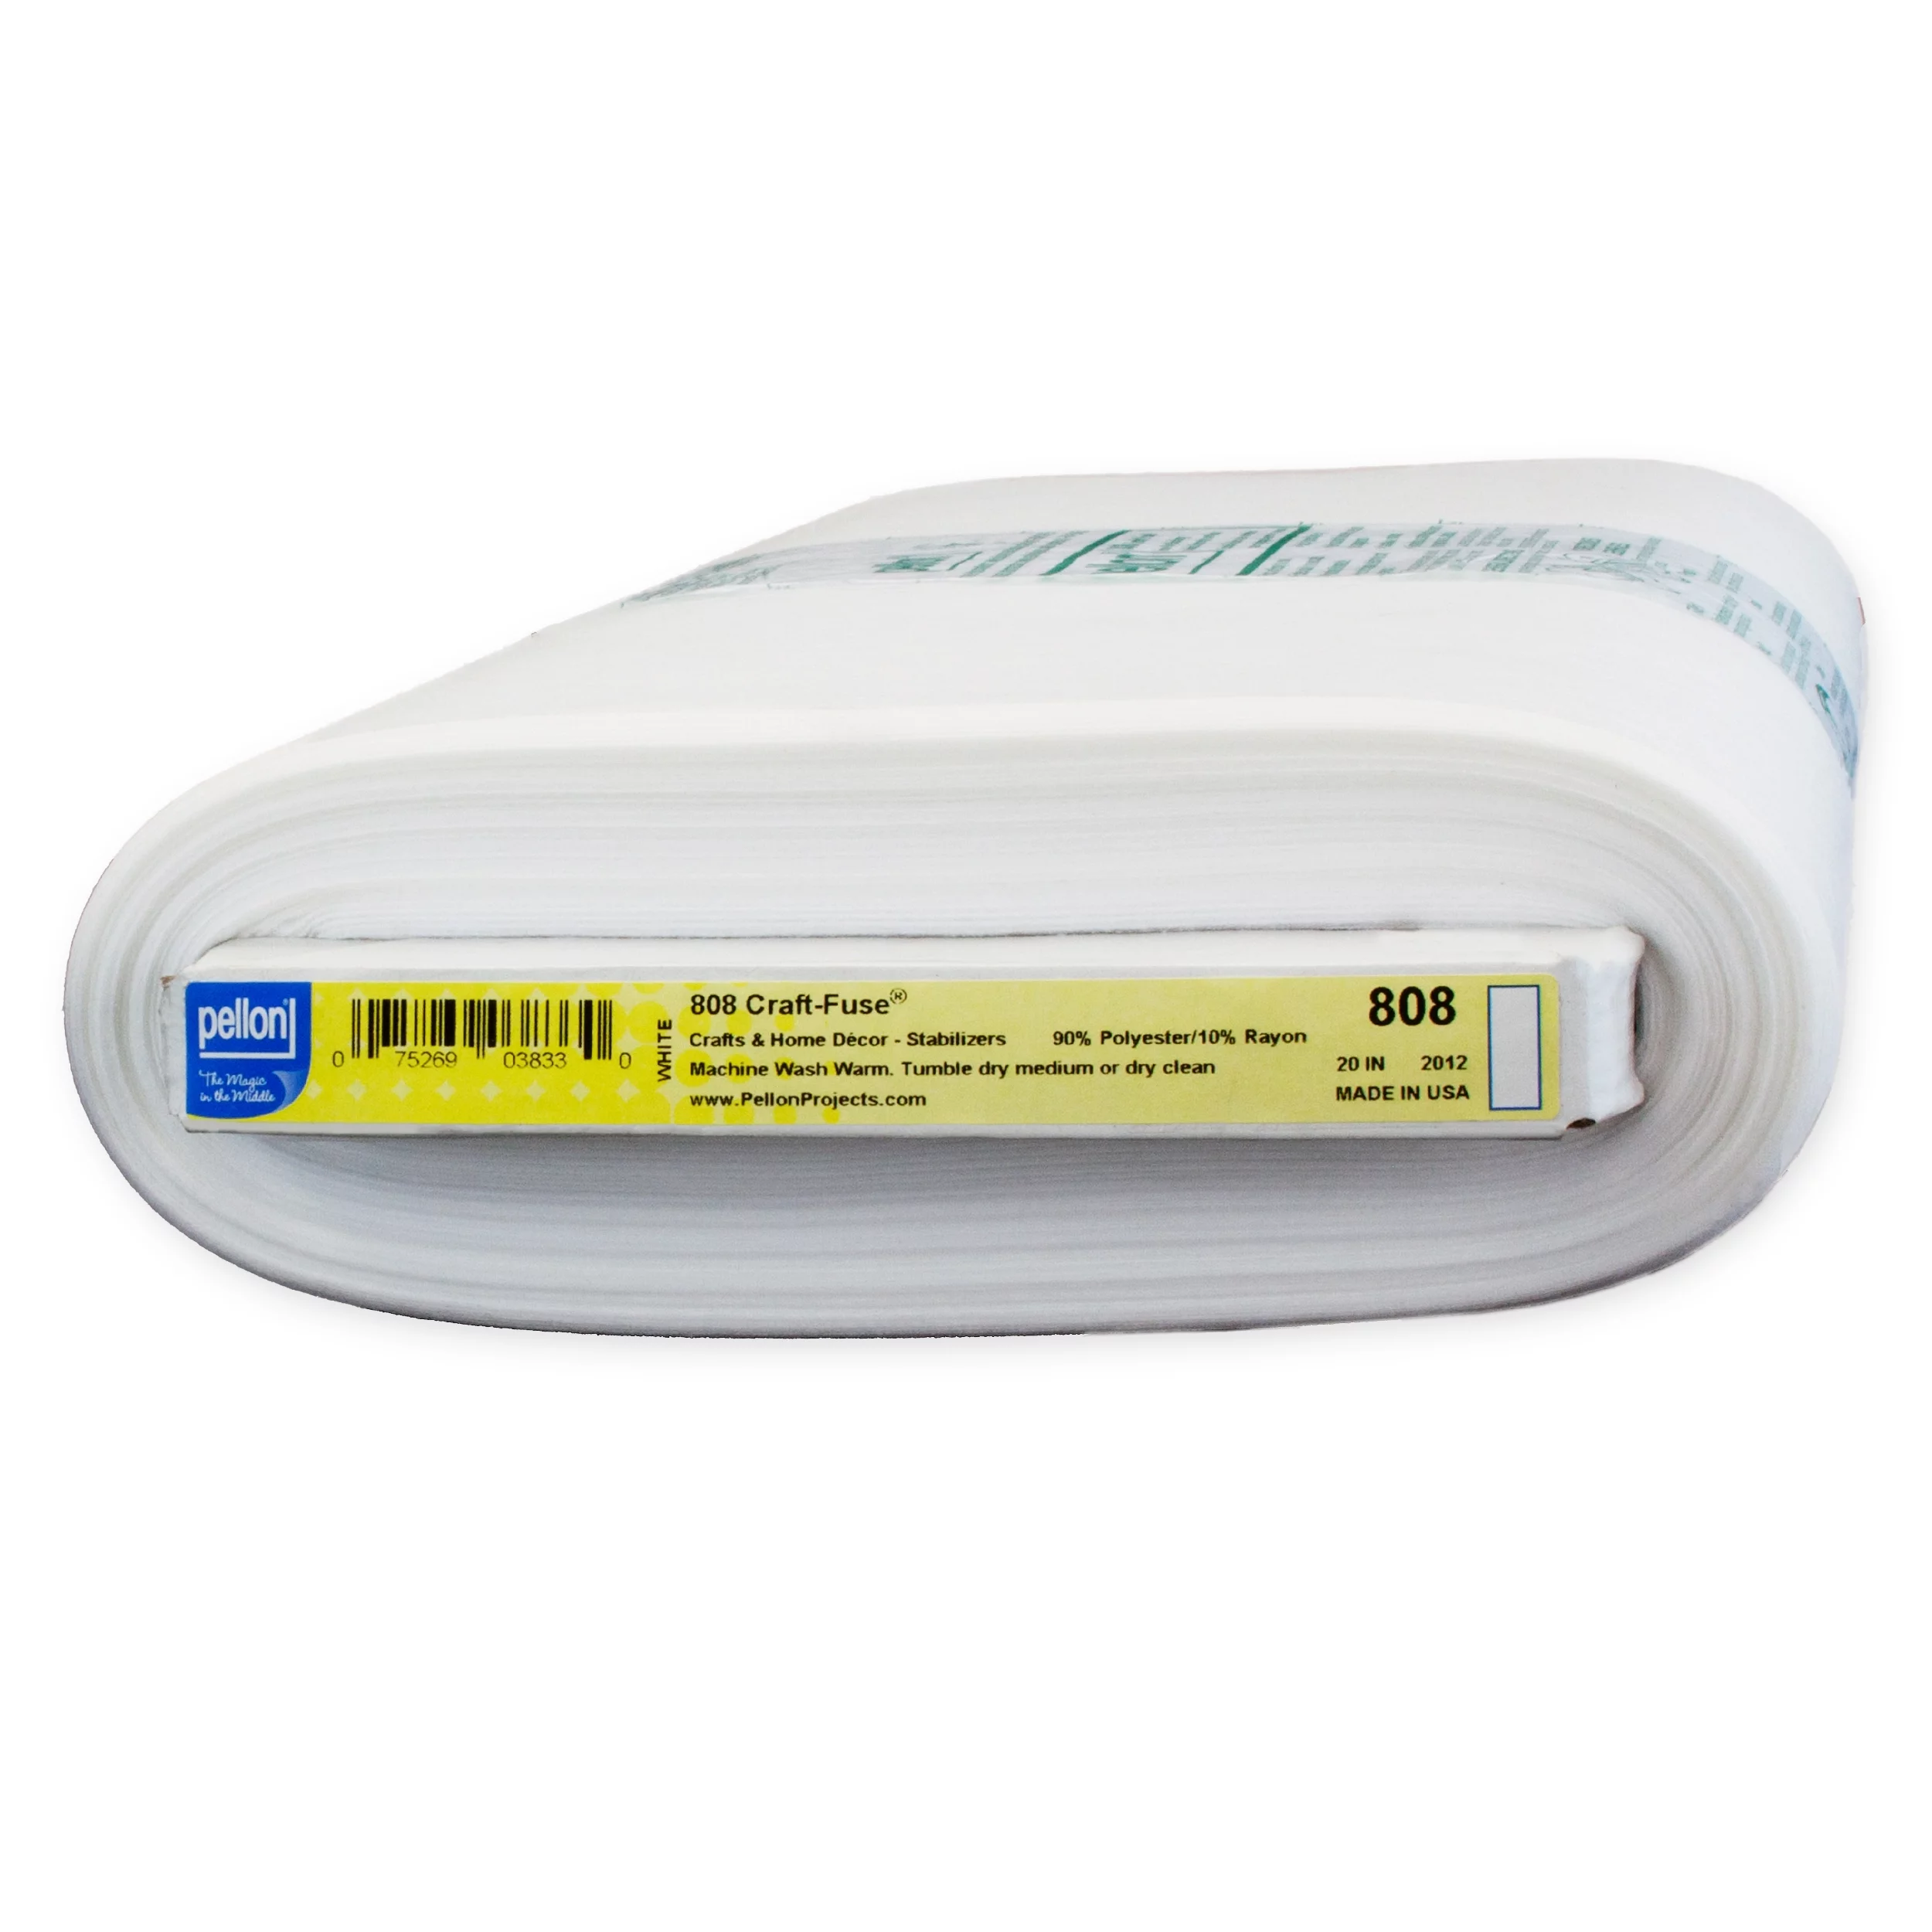 Pellon 808 Craft-Fuse Fabric Stabilizer, White. 20" x 10" Yards by the Bolt